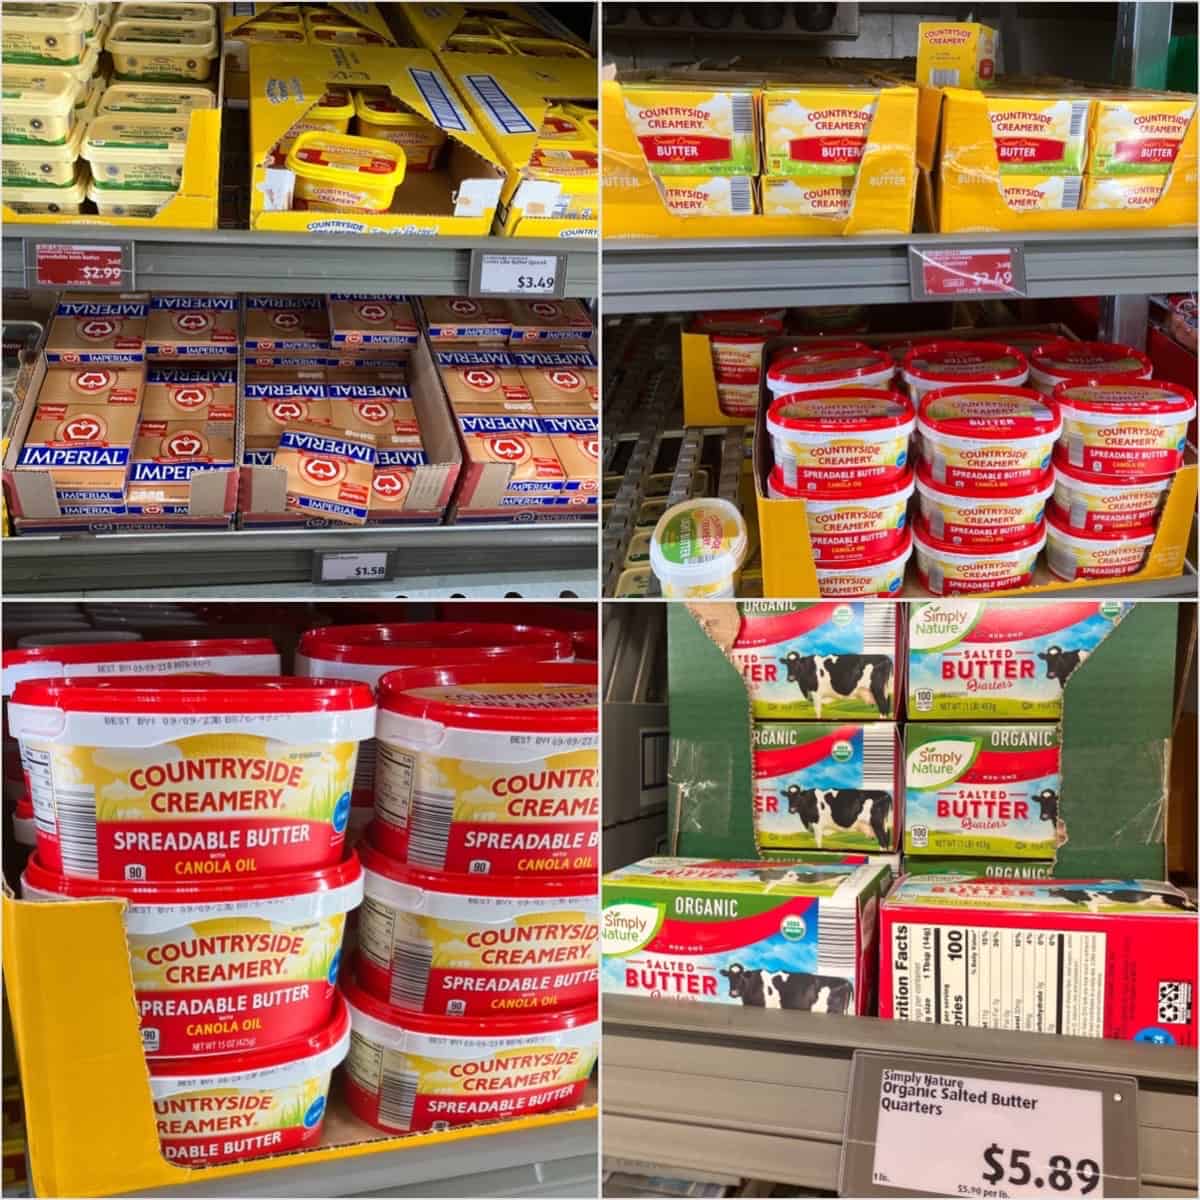 Aldi Butter Price (Cheap Butter on Sale) • Summer Yule Nutrition and